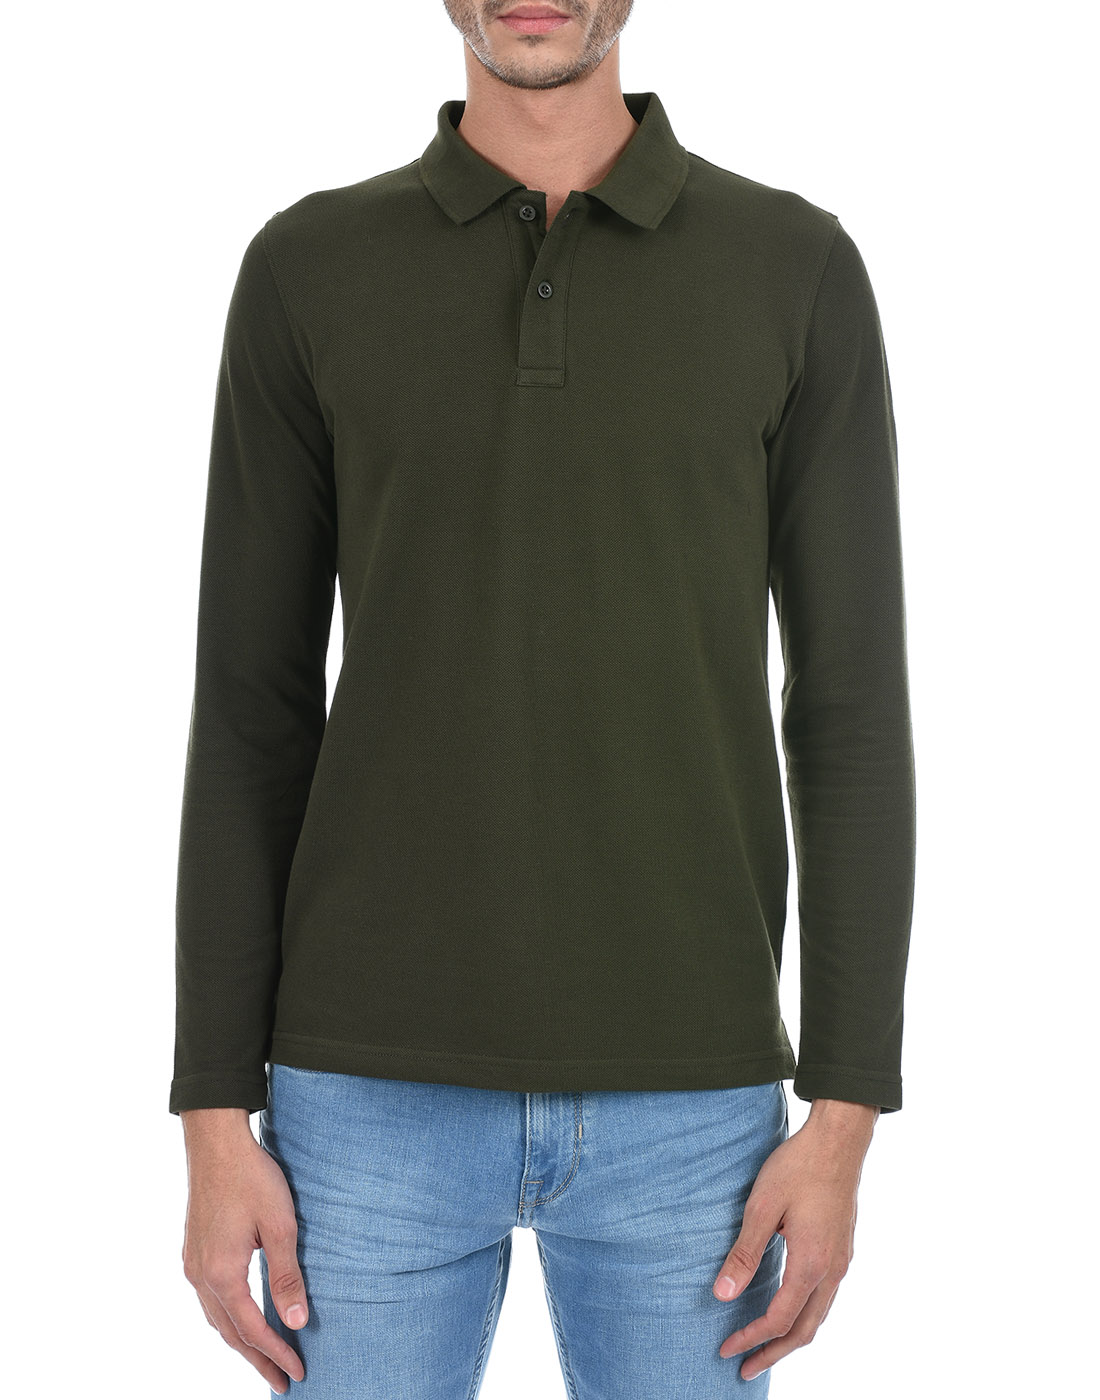 Oneway Men Solid Green Polo T-Shirt